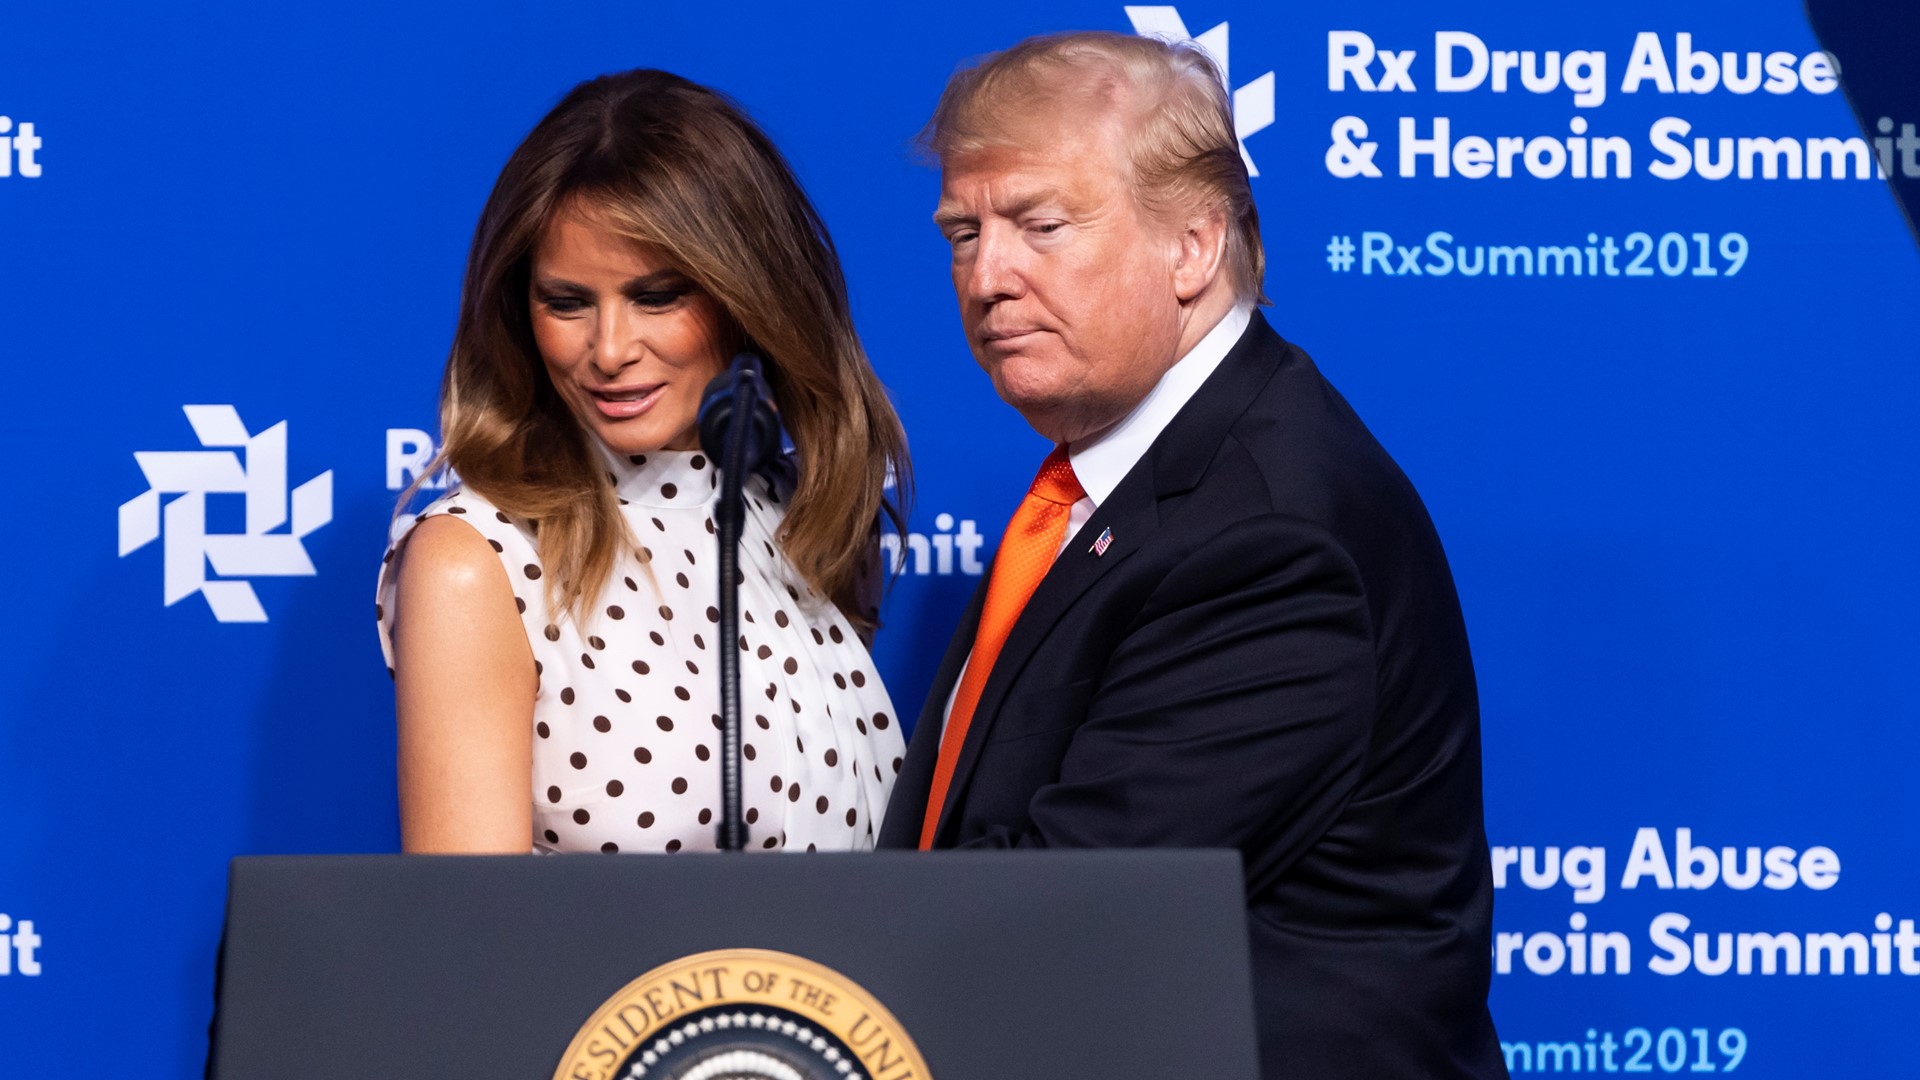 President Donald Trump and First Lady Melania Trump addressed the Eighth Annual Rx Drug Abuse and Heroin Summit in Atlanta on April 24, 2019.